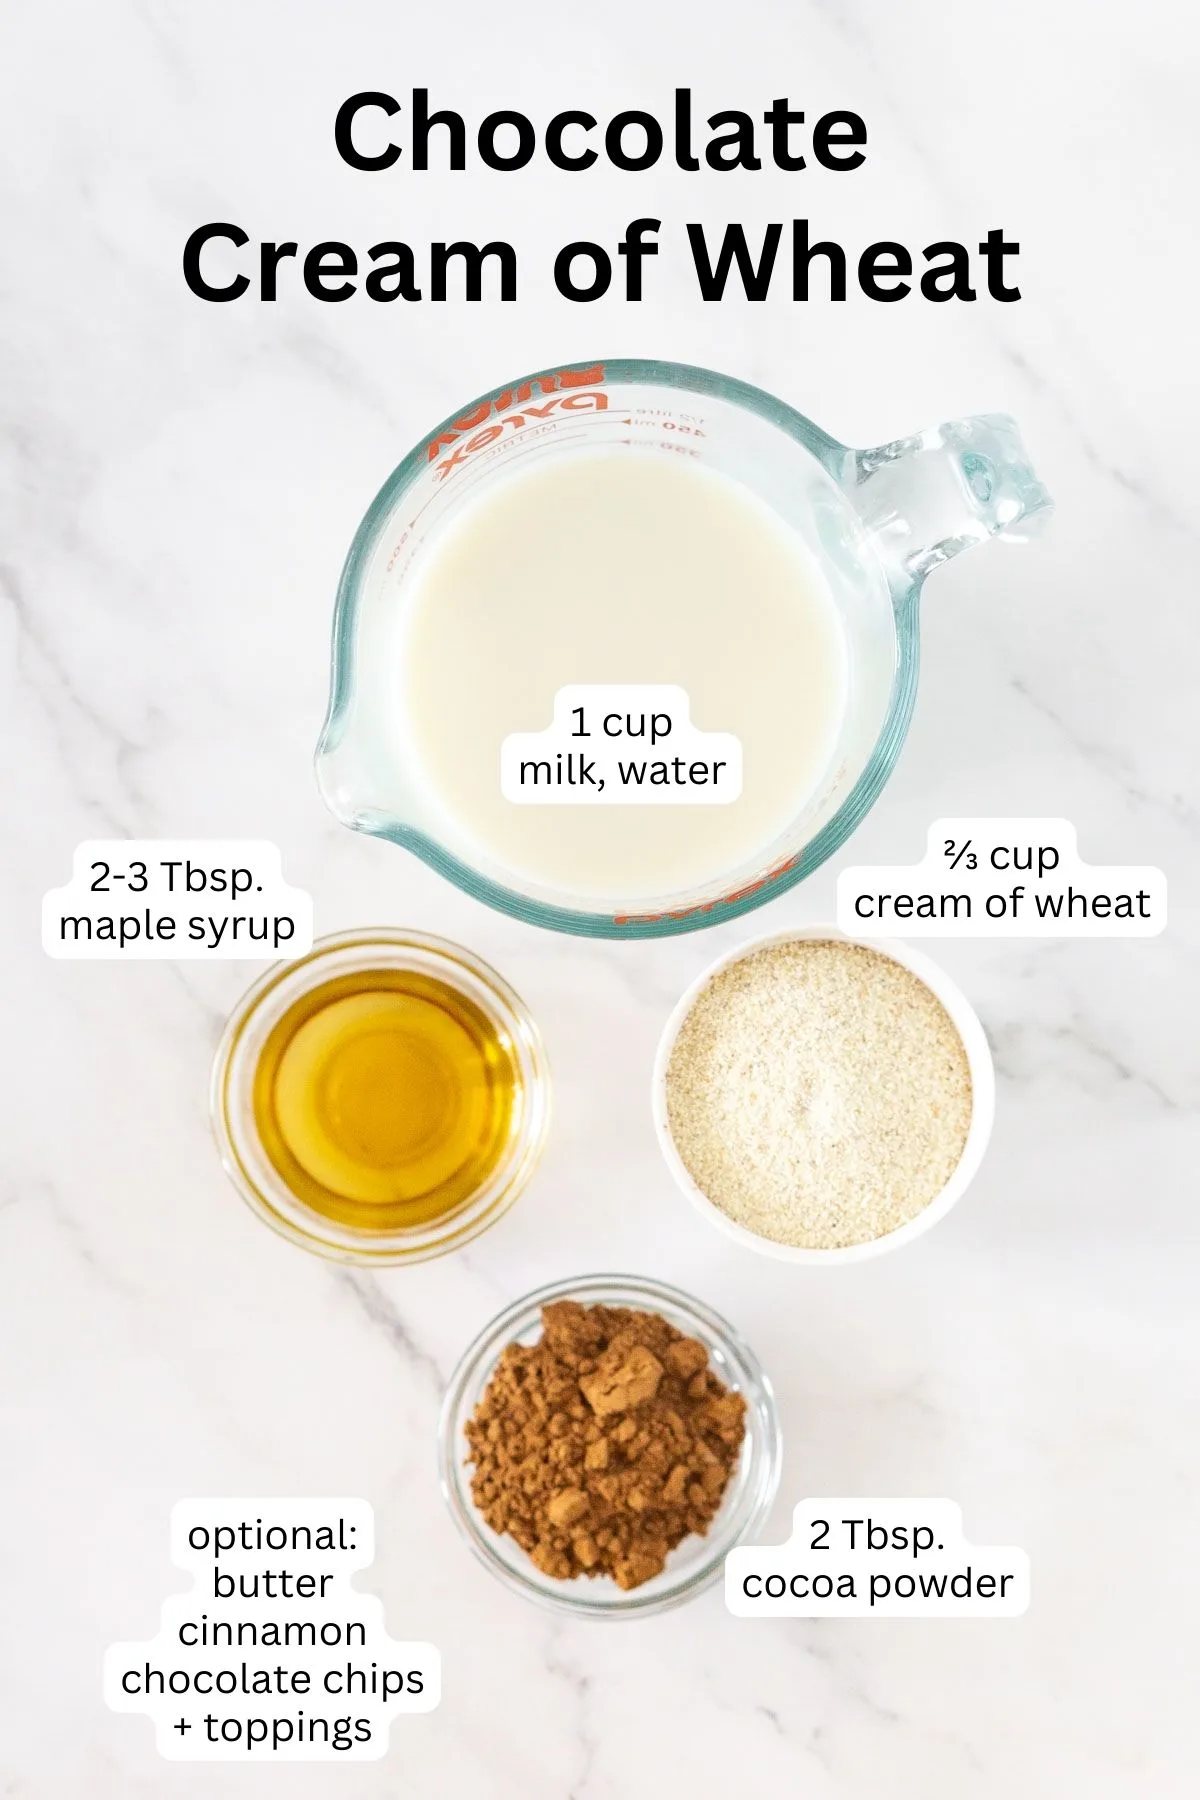 Ingredients to make chocolate cream of wheat